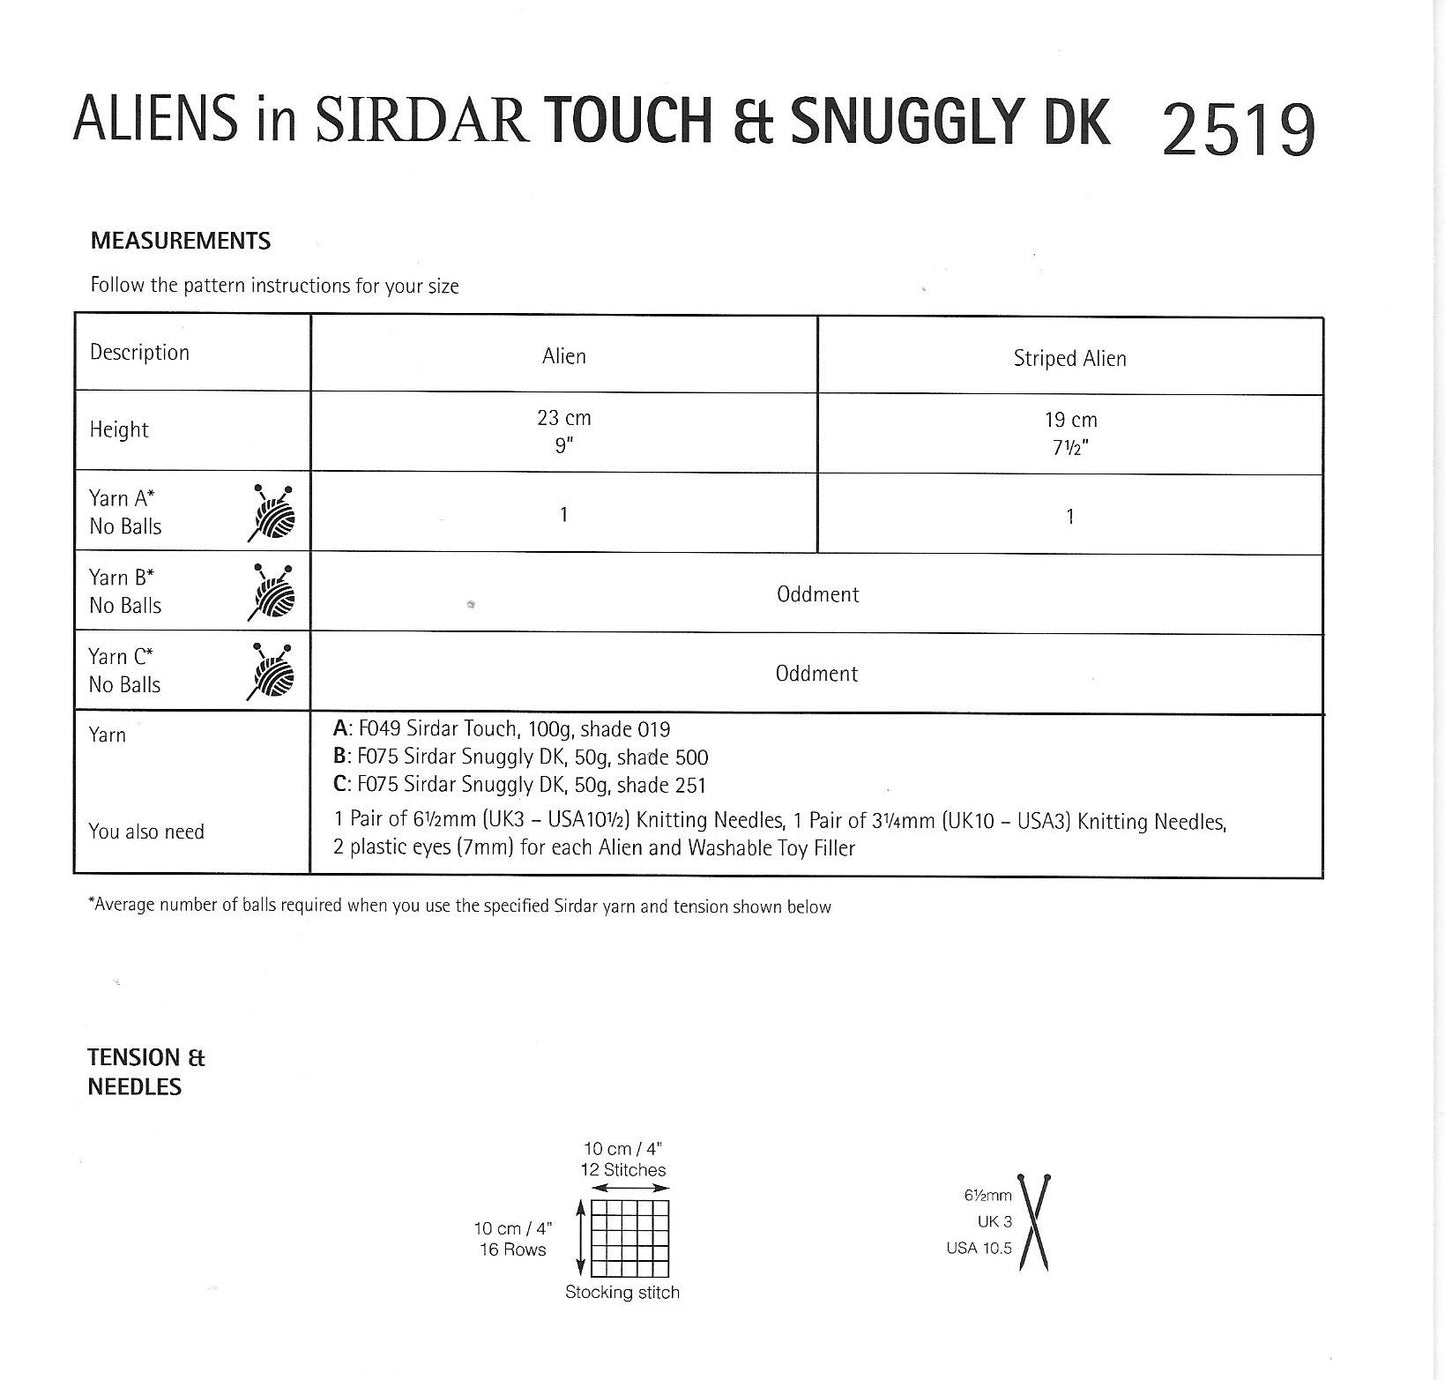 2519 Sirdar Touch and Snuggly DK Toy Aliens